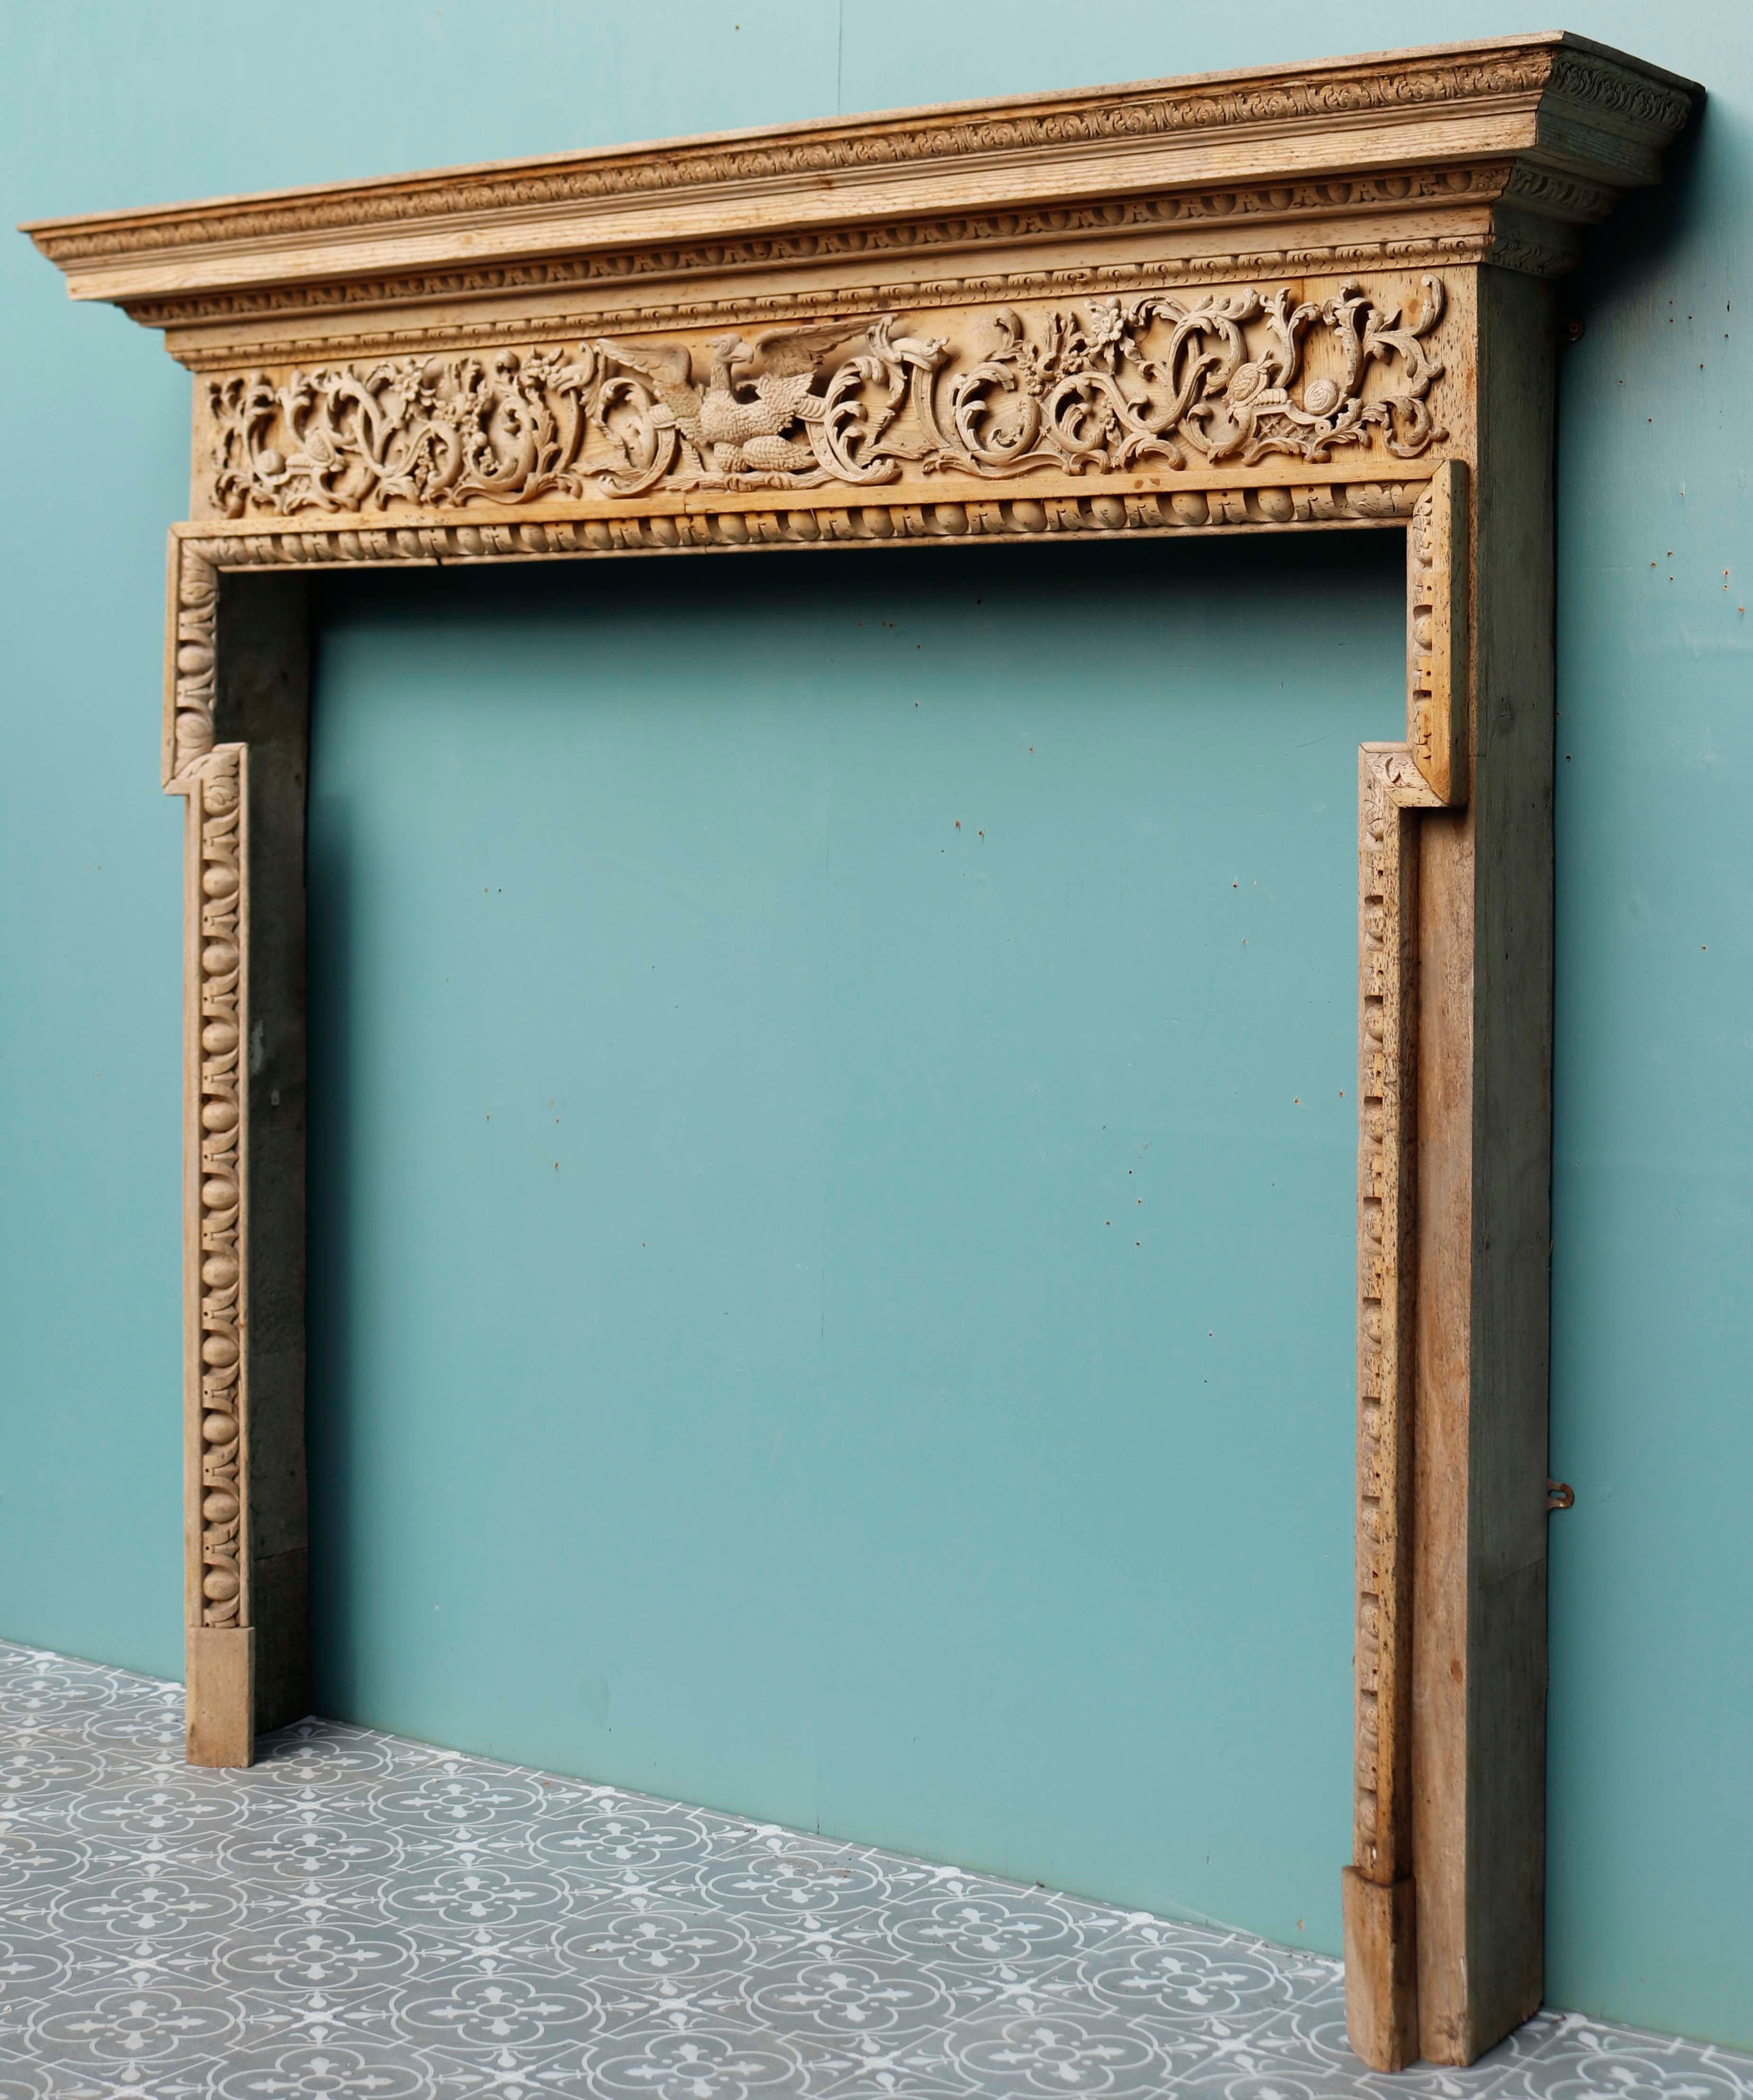 Georgian Period Carved Fireplace Surround In Good Condition For Sale In Wormelow, Herefordshire